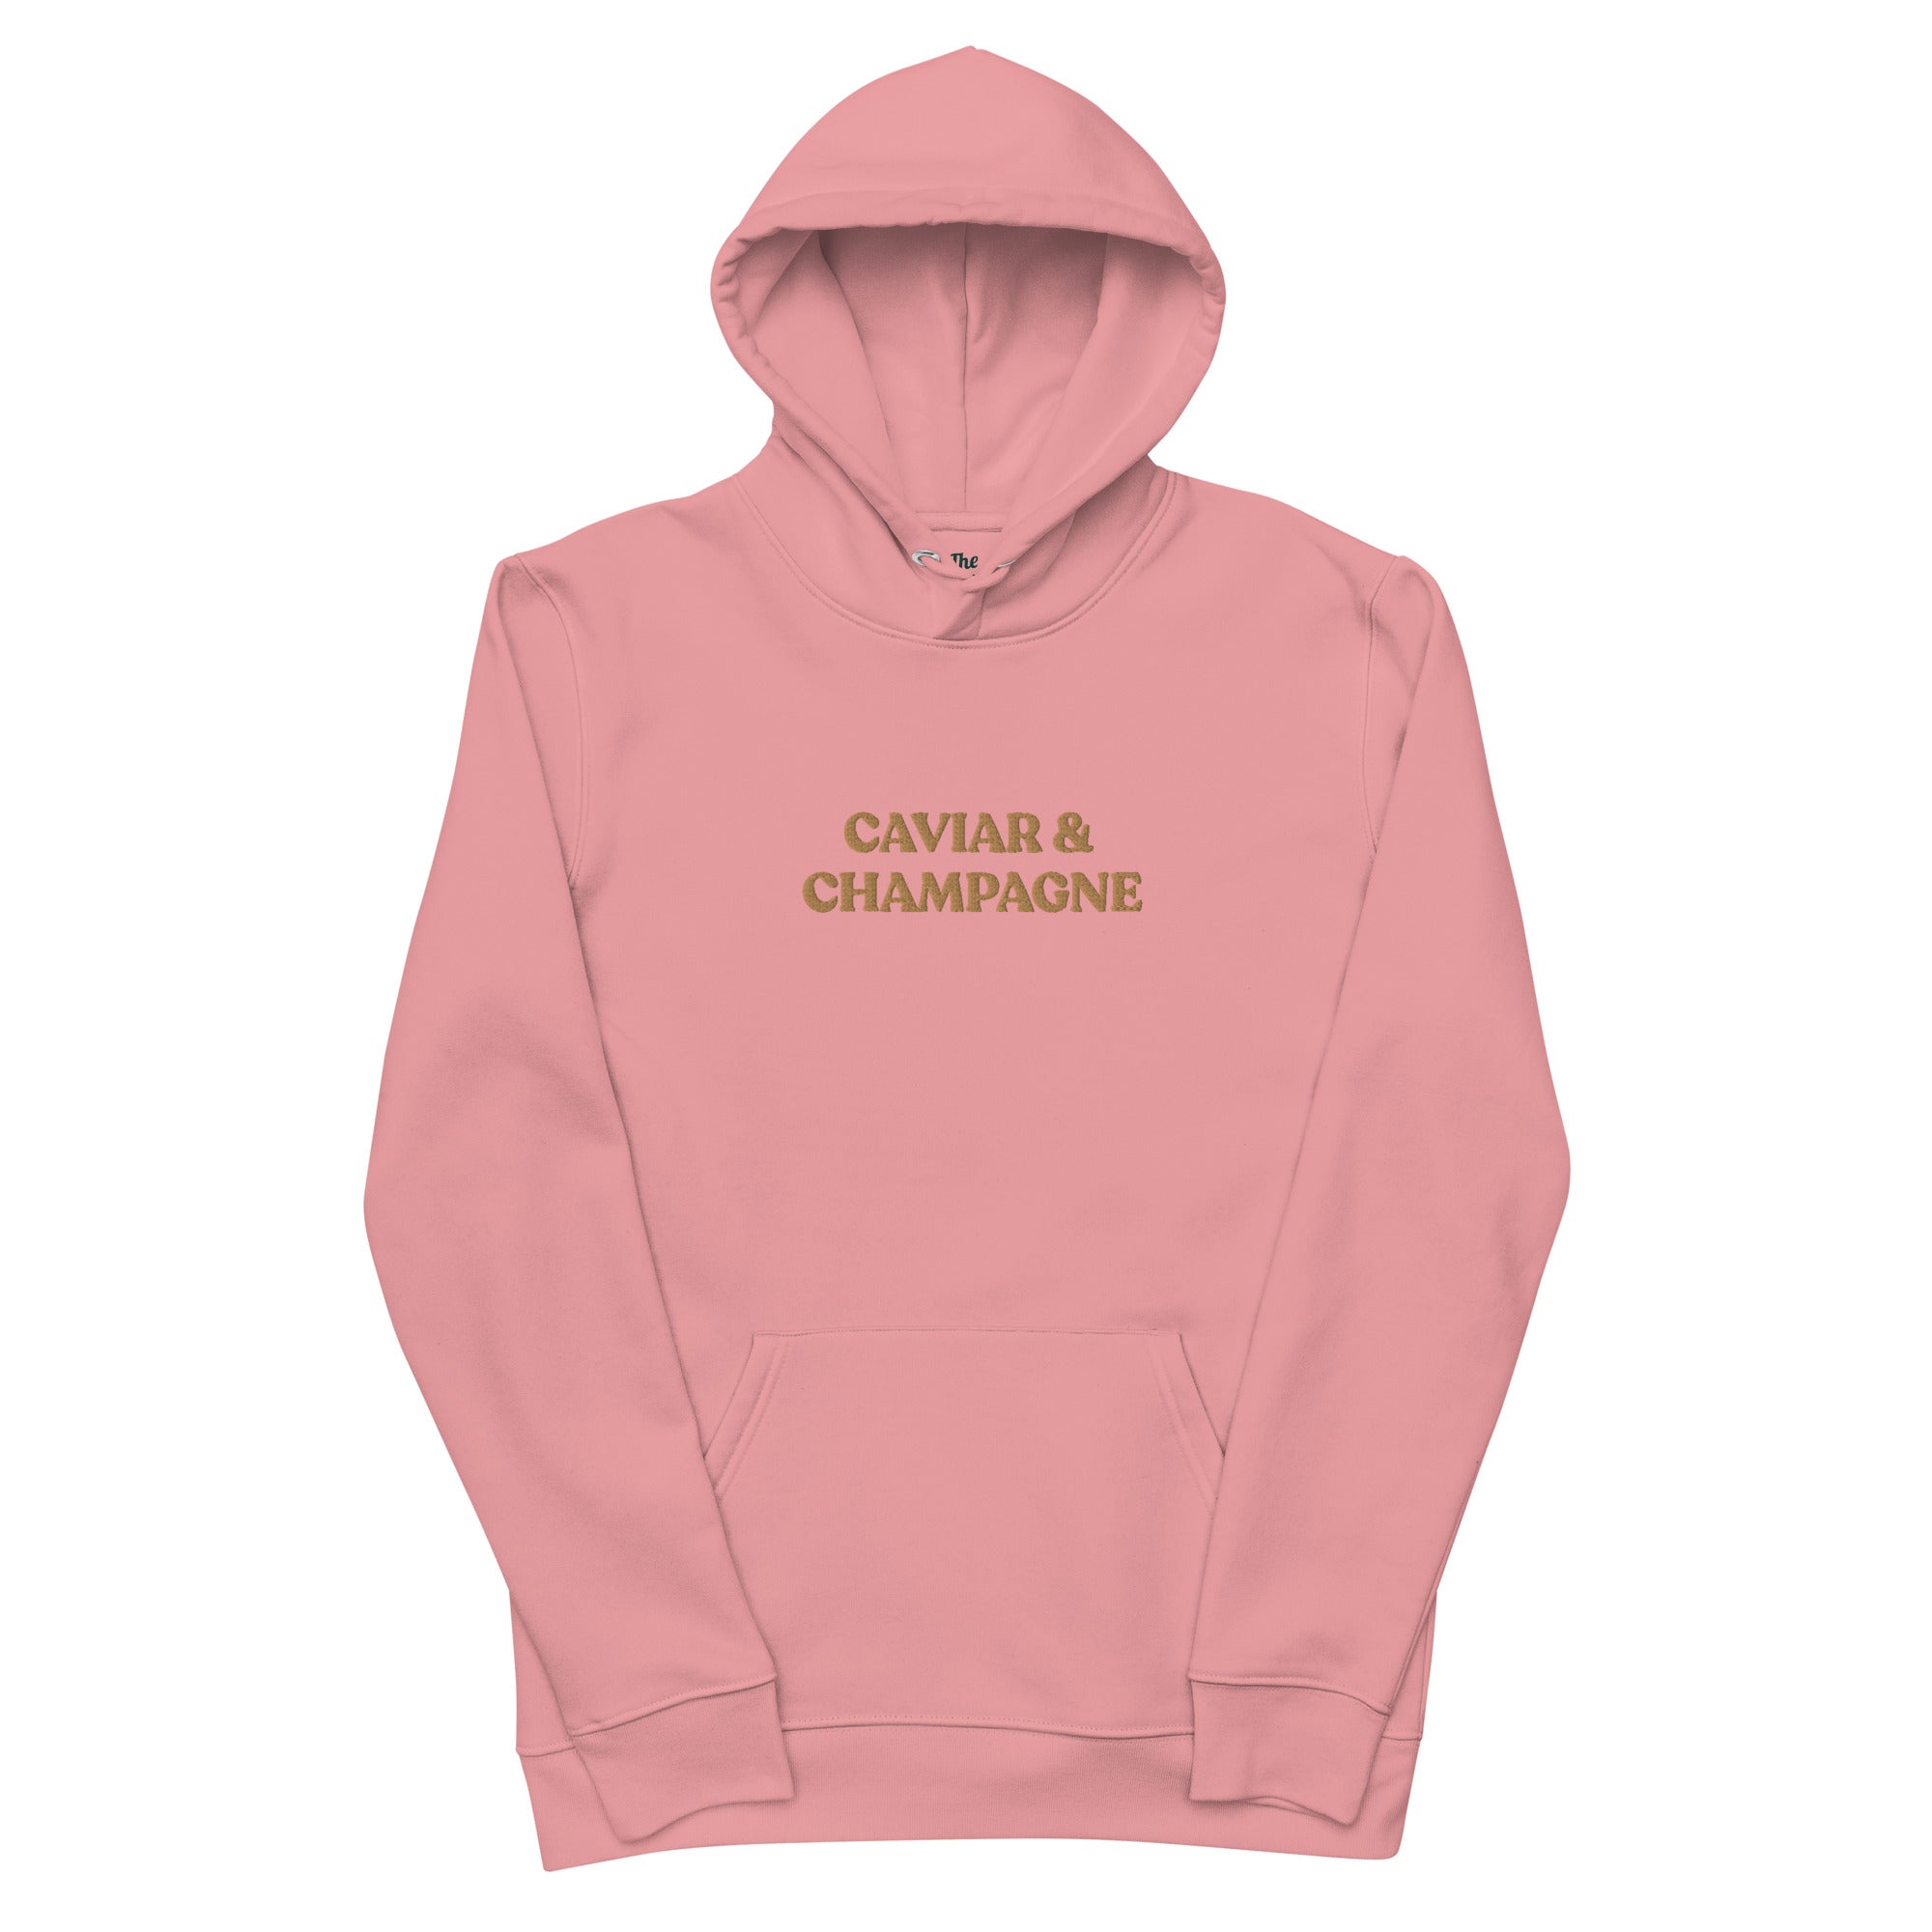 Caviar & Champagne - Organic Embroidered Hoodie - The Refined Spirit